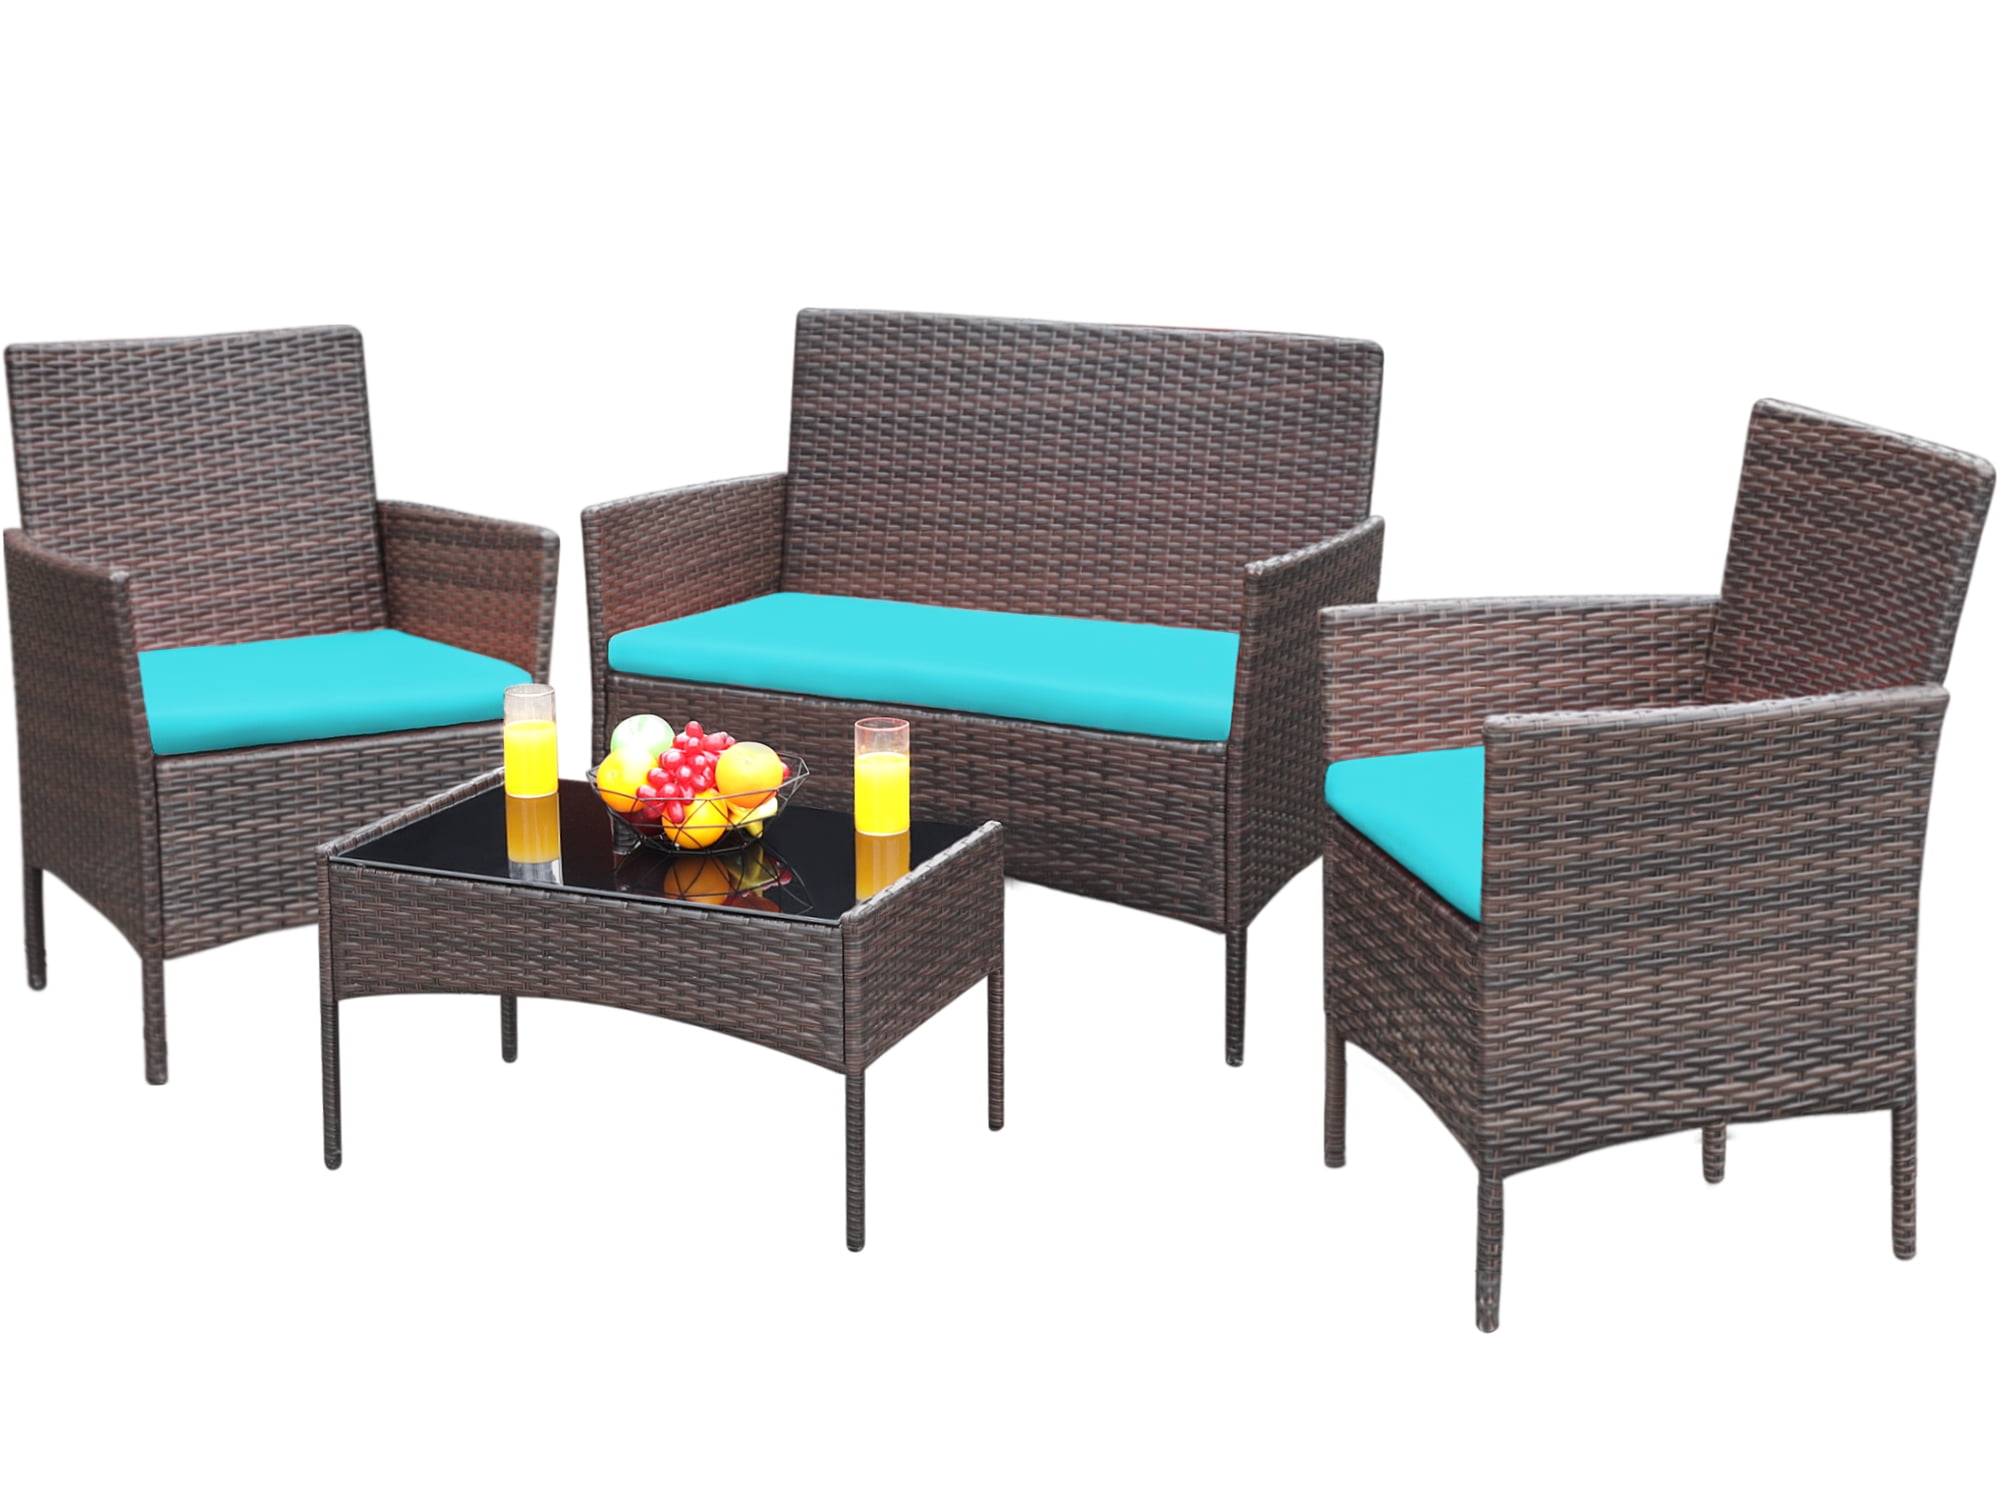 Devoko 4 Pieces Outdoor Patio Conversation Set PE Rattan Wicker Furniture Set Includes Armchairs Loveseat and Table, Brown/Blue